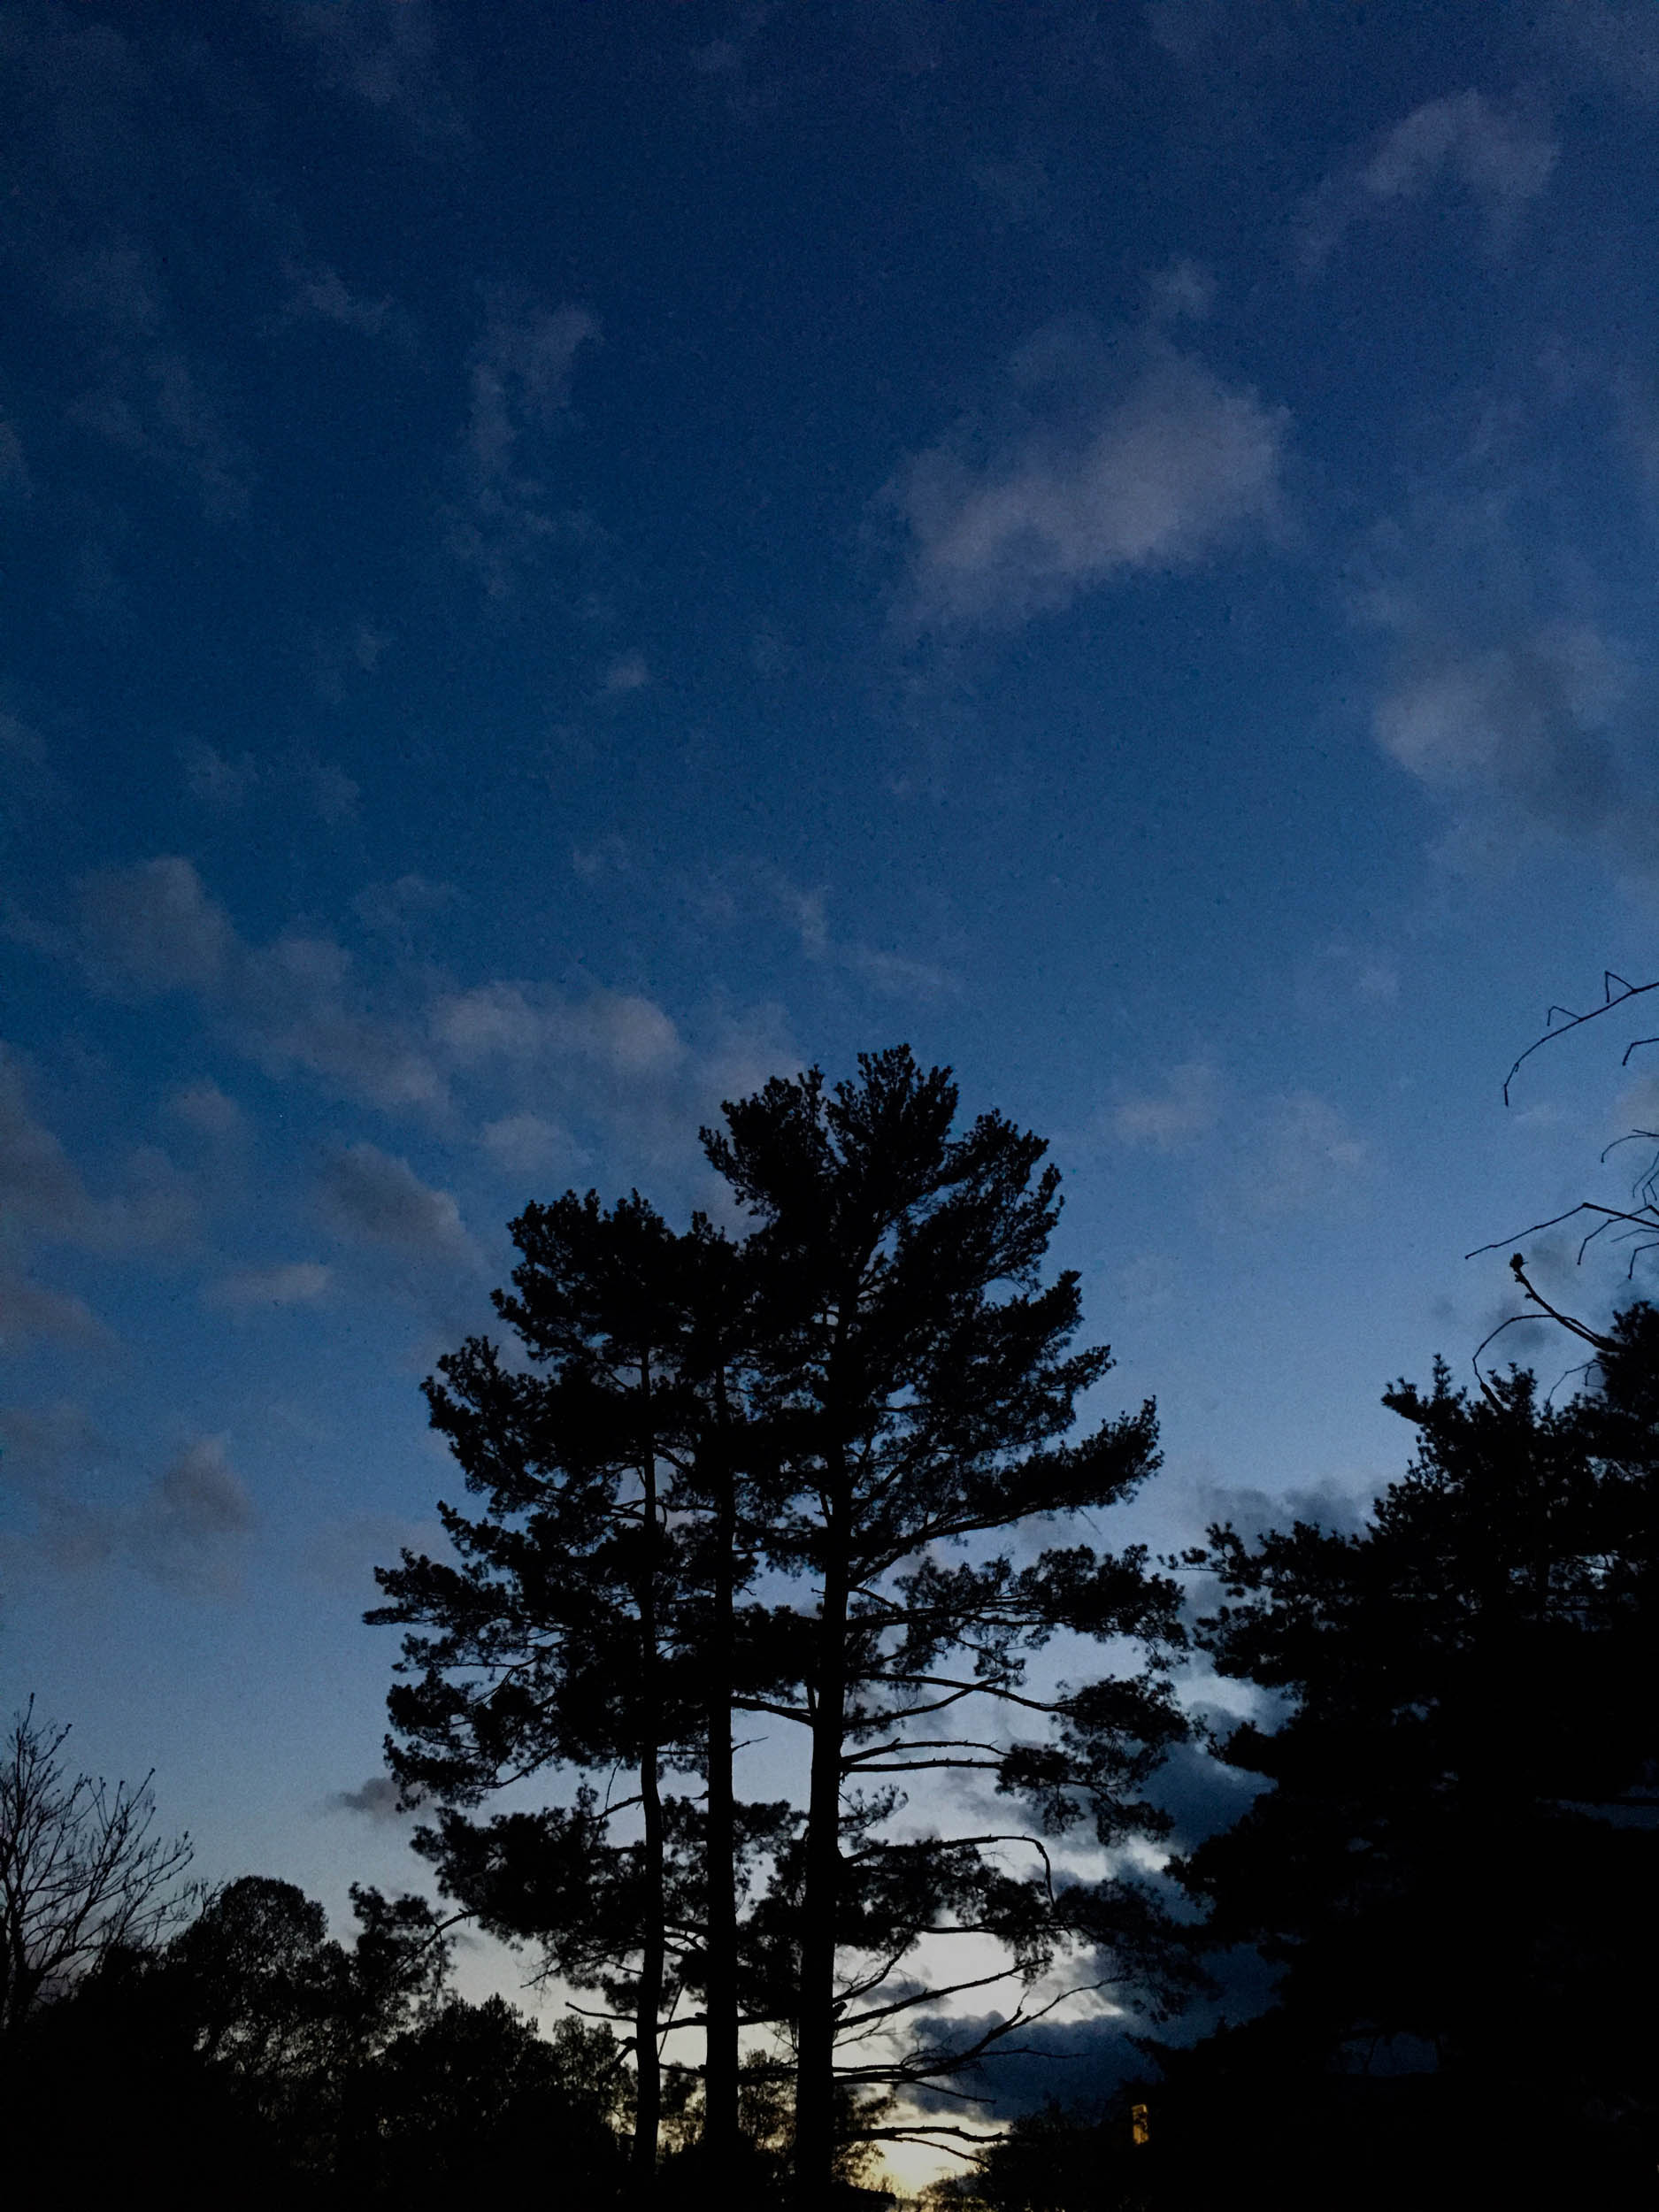 Top of a tree with dark blue sky and clouds